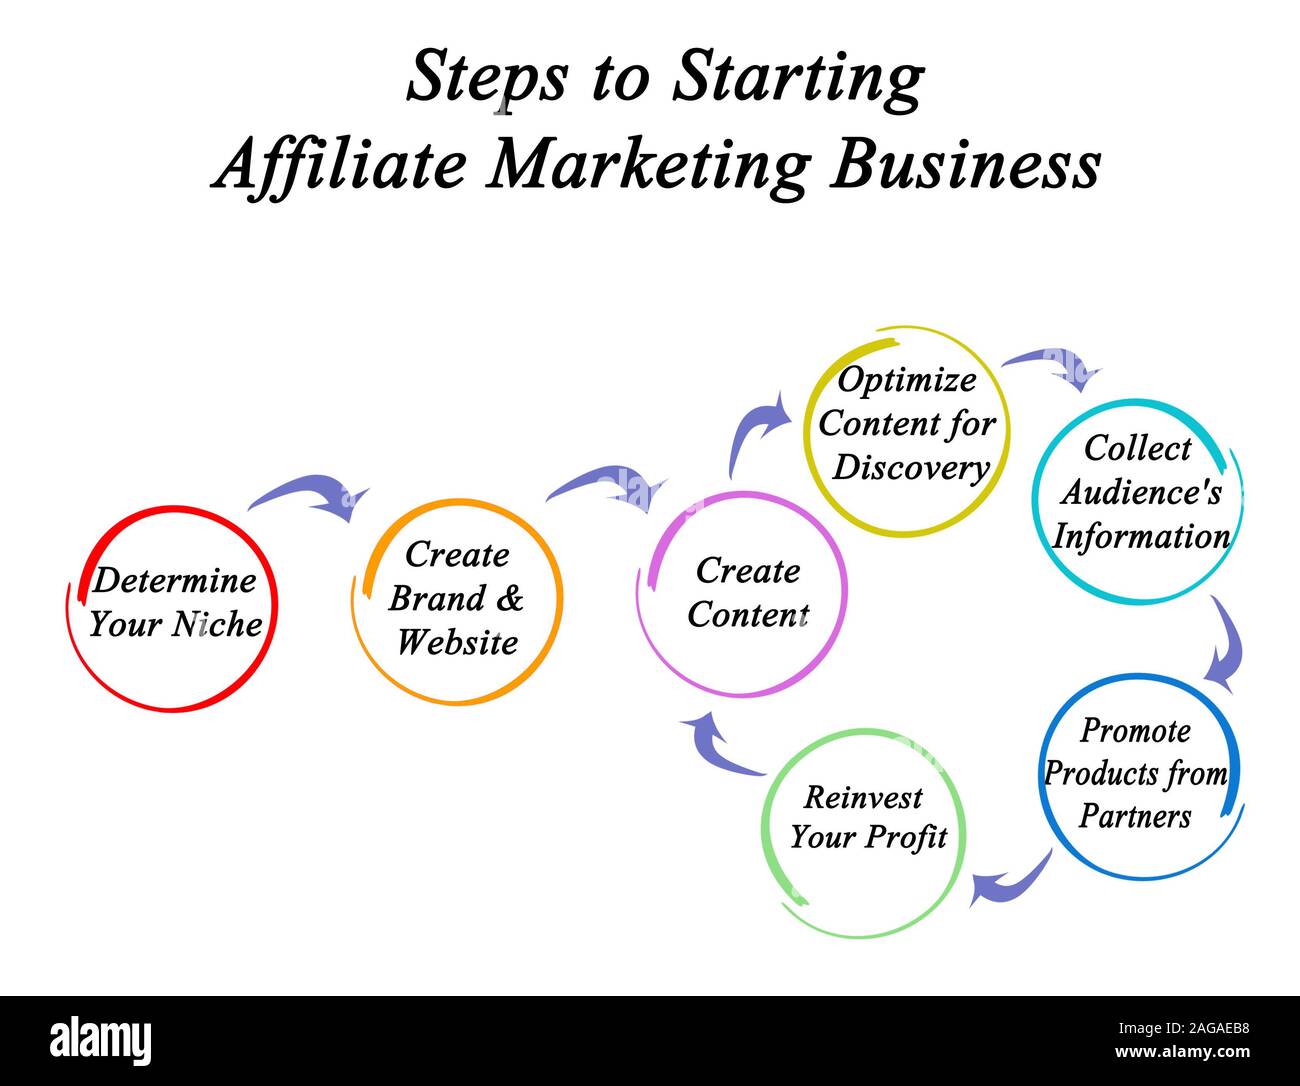 Affiliate Marketing: Advanced Level Affiliate Marketing Business Guide (How  to Start Your Affiliate Marketing Promotion Business the Right Way) by  Leonard Ross - Ebook - Scribd